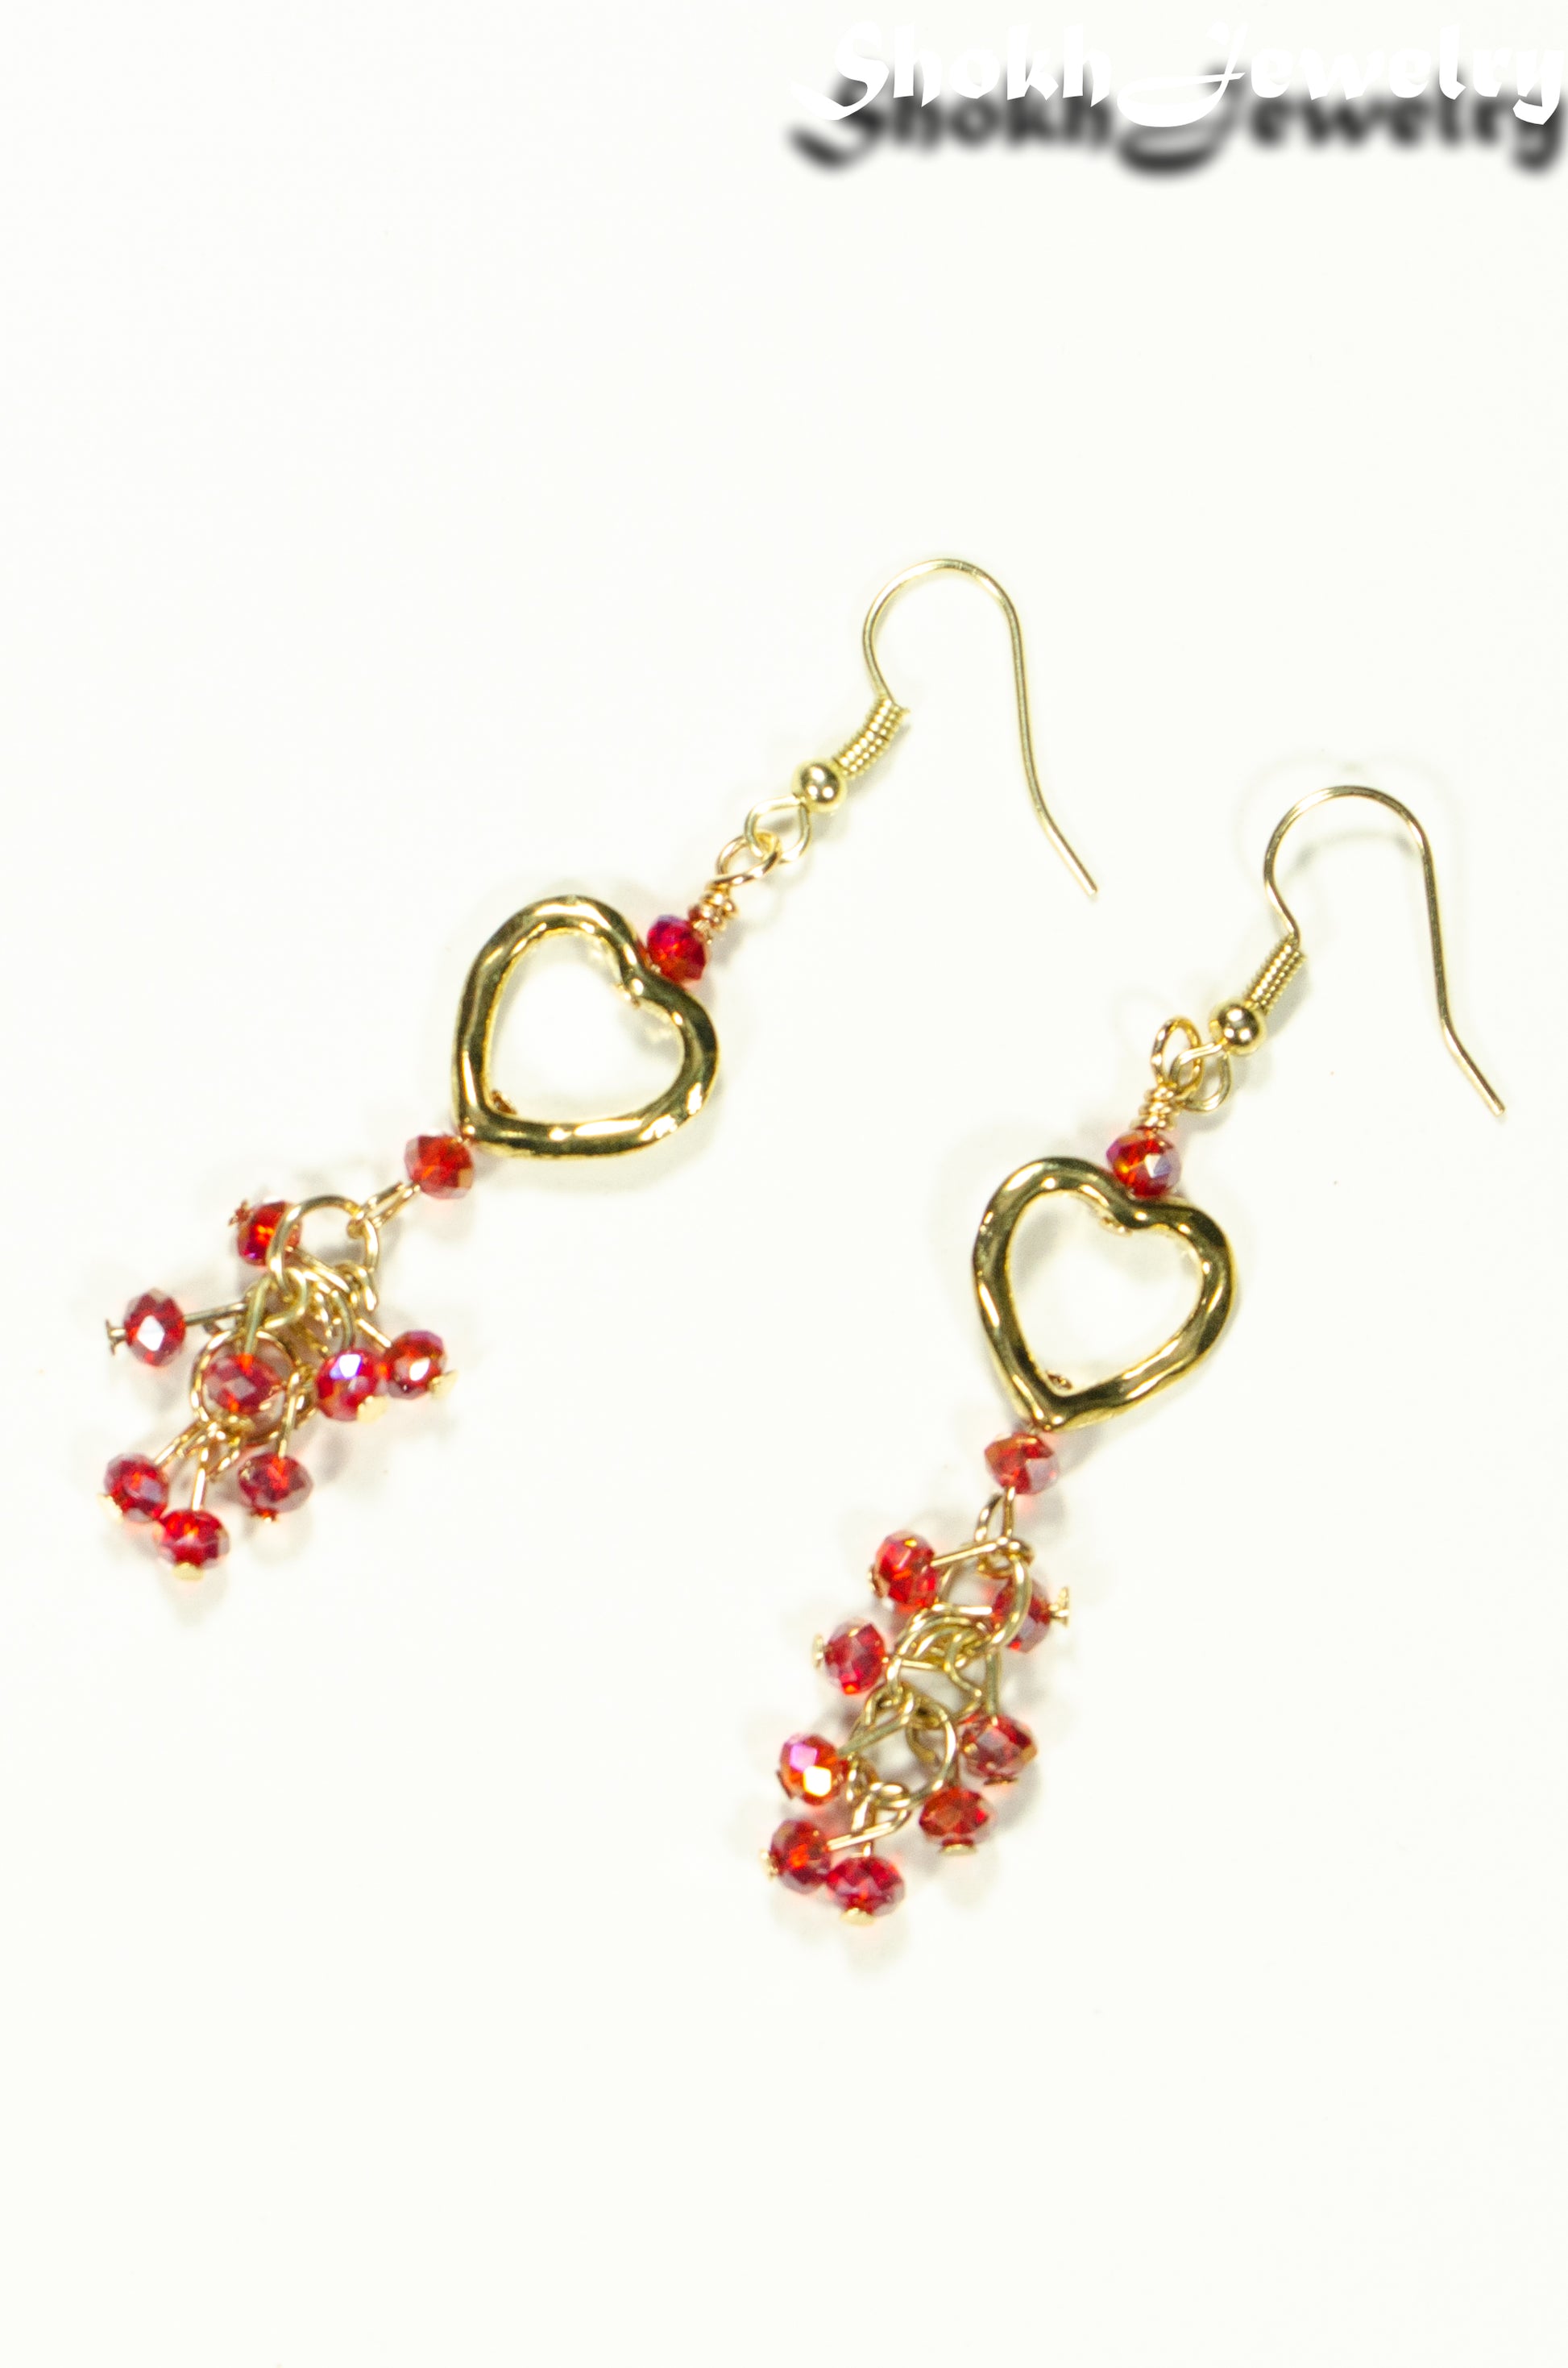 Top view of Gold Plated Heart and Red Crystal Cluster Earrings.